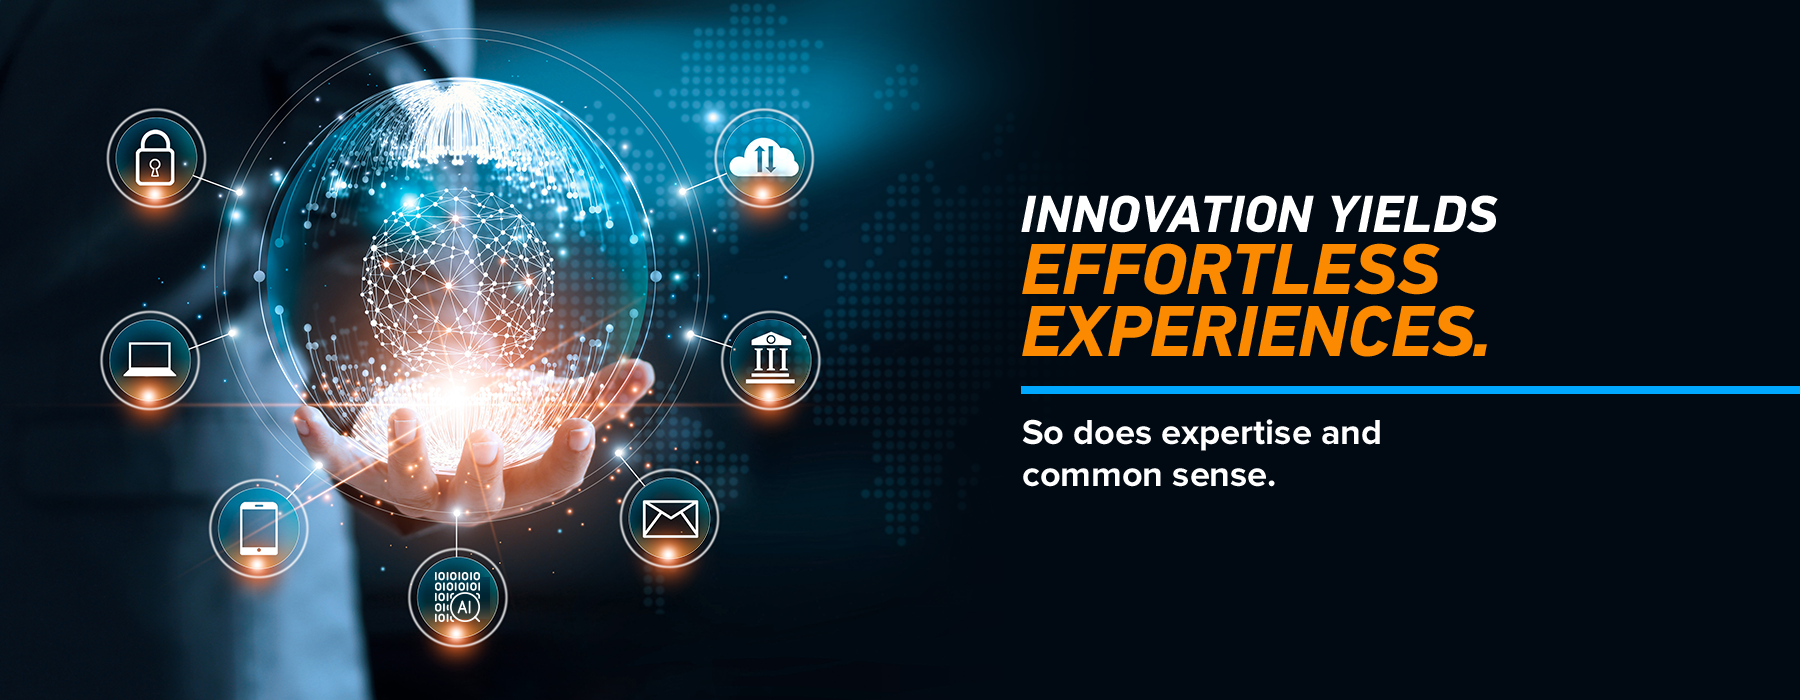 innovation yields effortless experiences